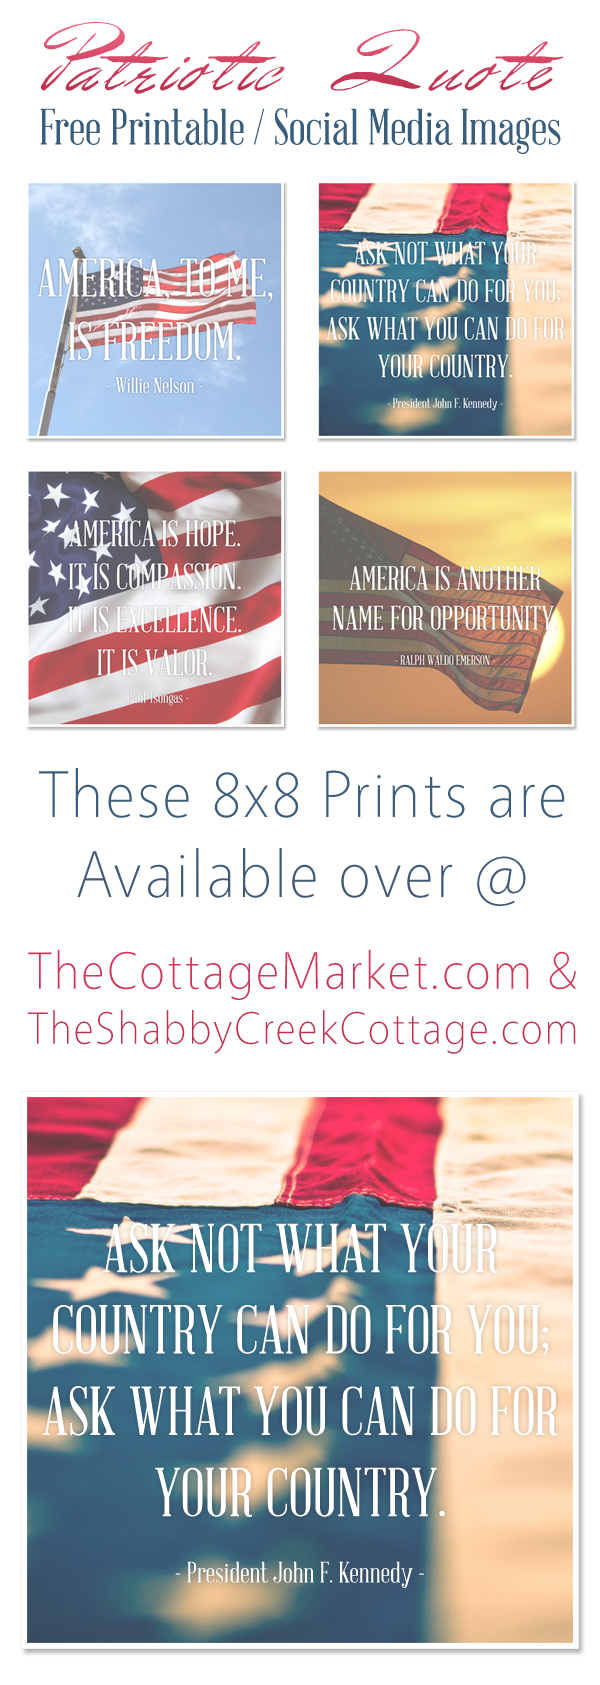 http://thecottagemarket.com/wp-content/uploads/2015/06/PatrioticQuote-Tower.png